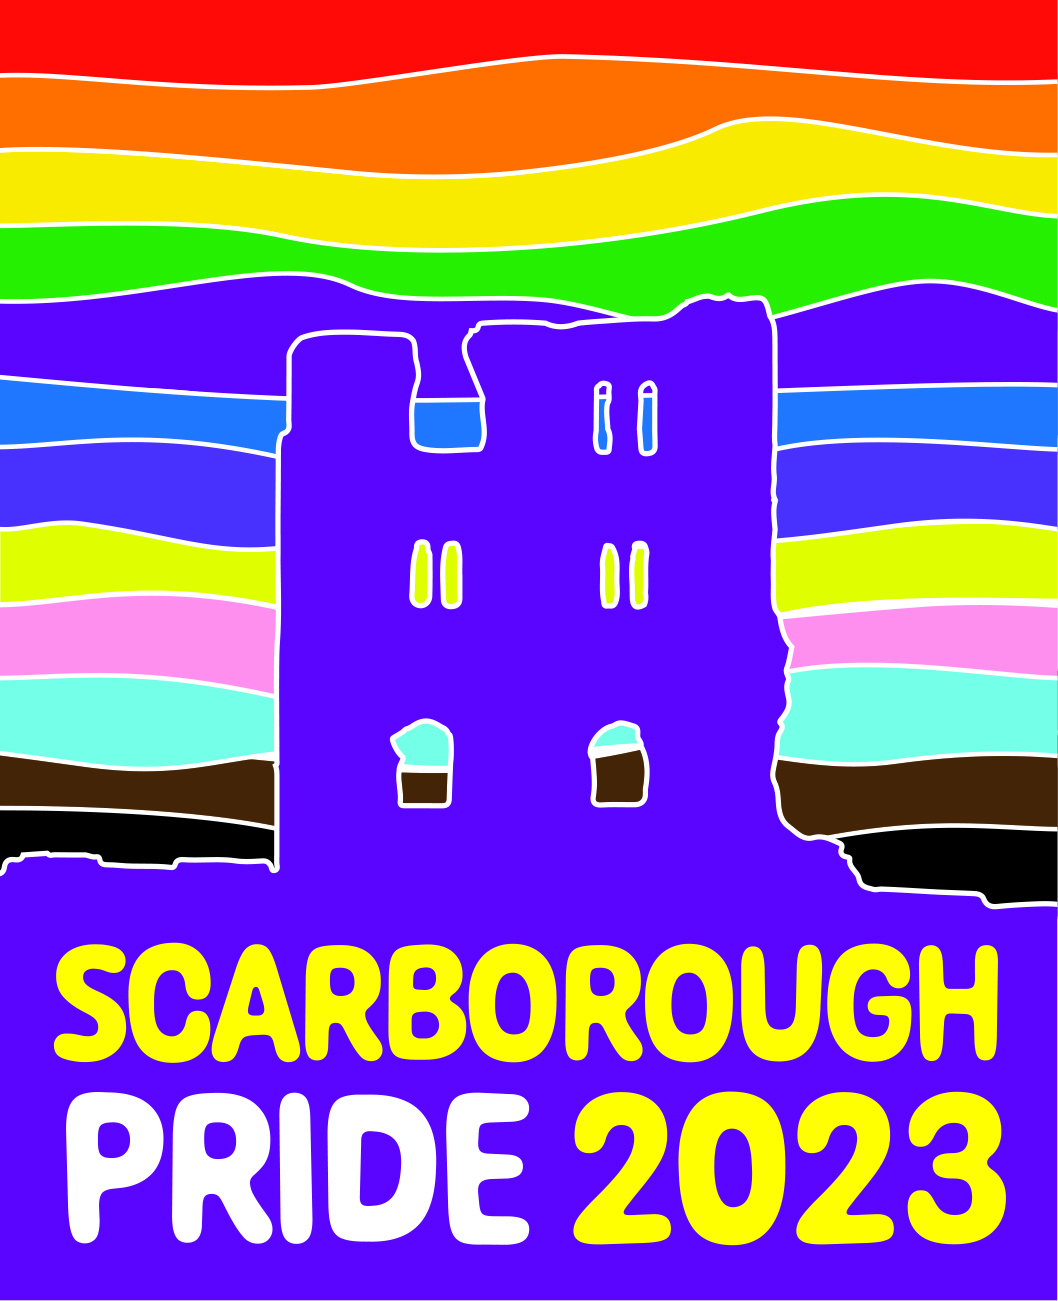 Scarborough Pride launches…the Lip-Sync Battle to crown the Quing!